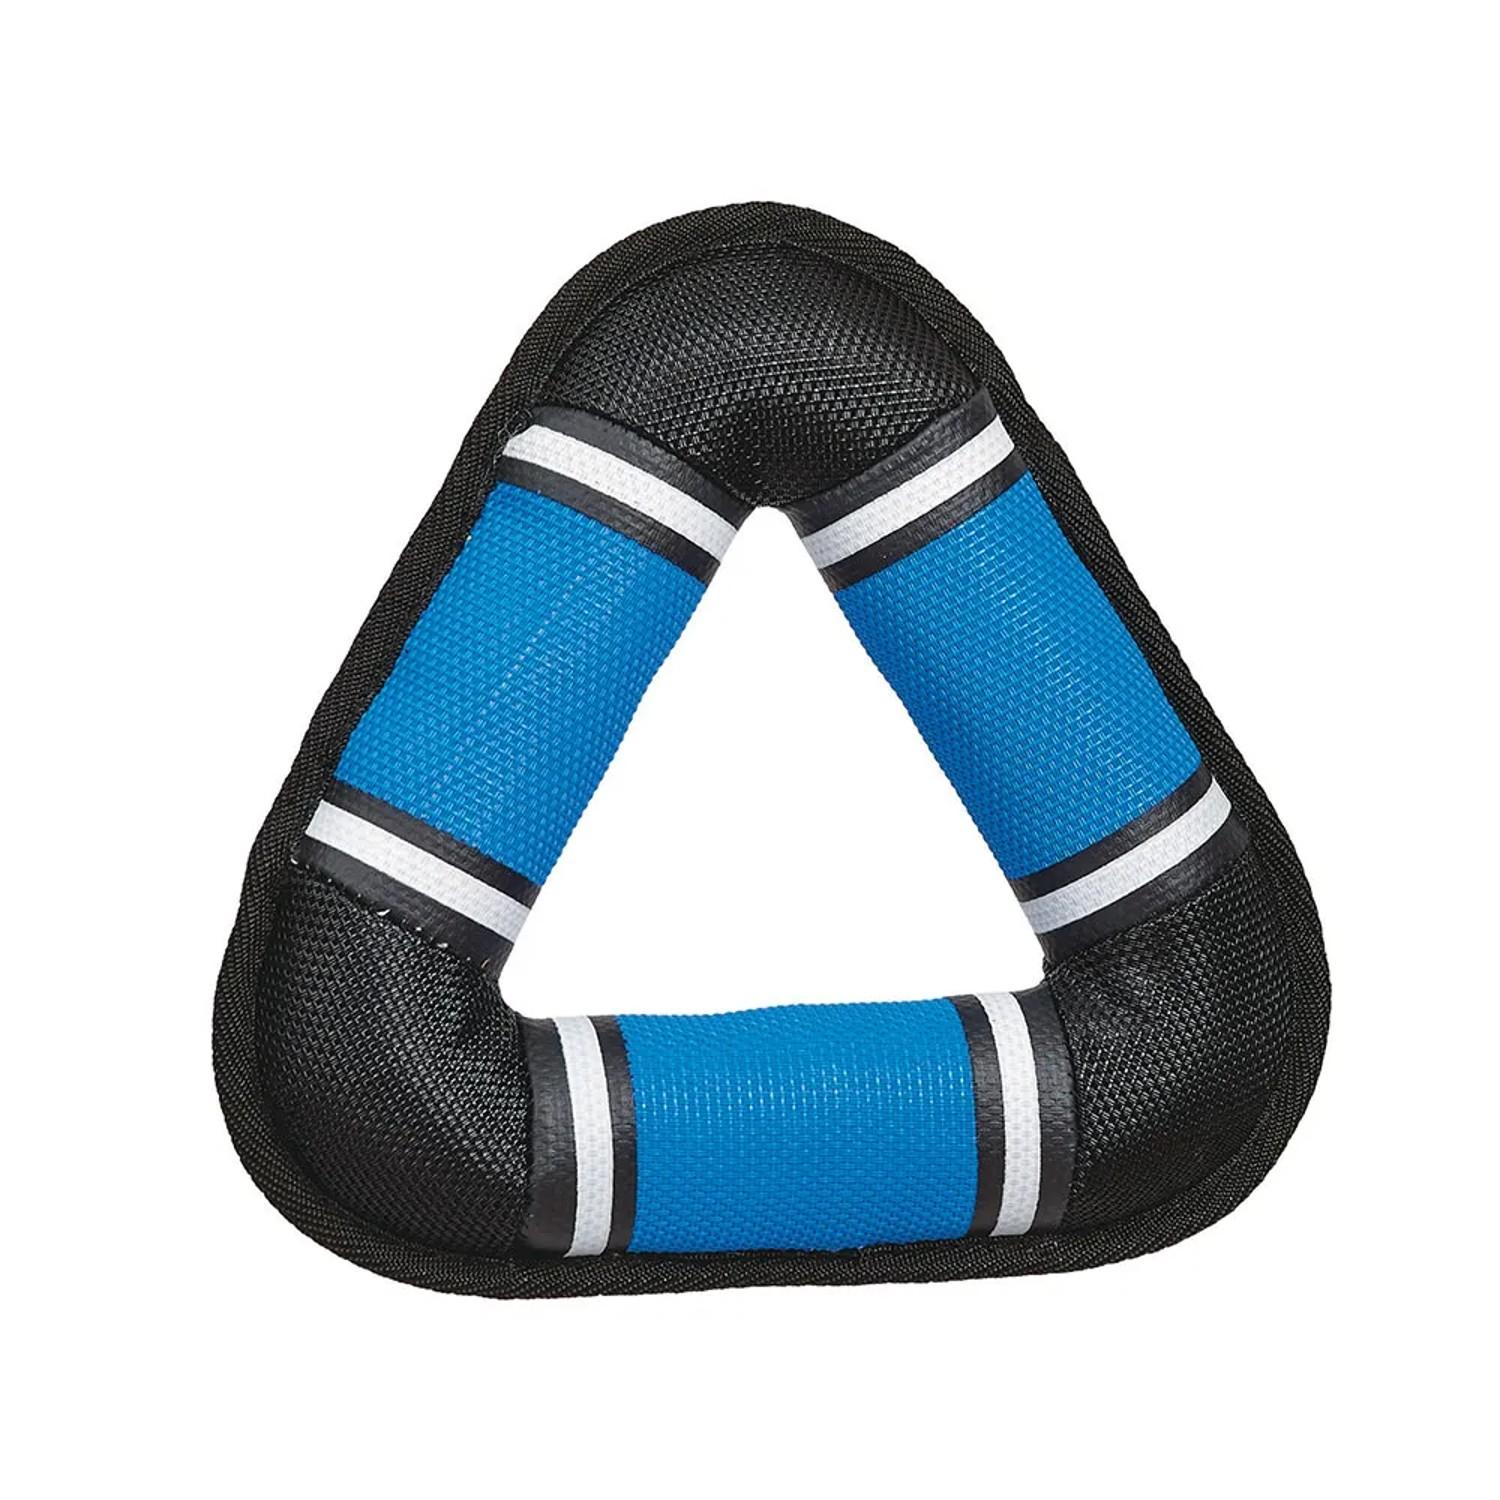 Zanies Toughstructable Toss Dog Toy - Blue Triangle